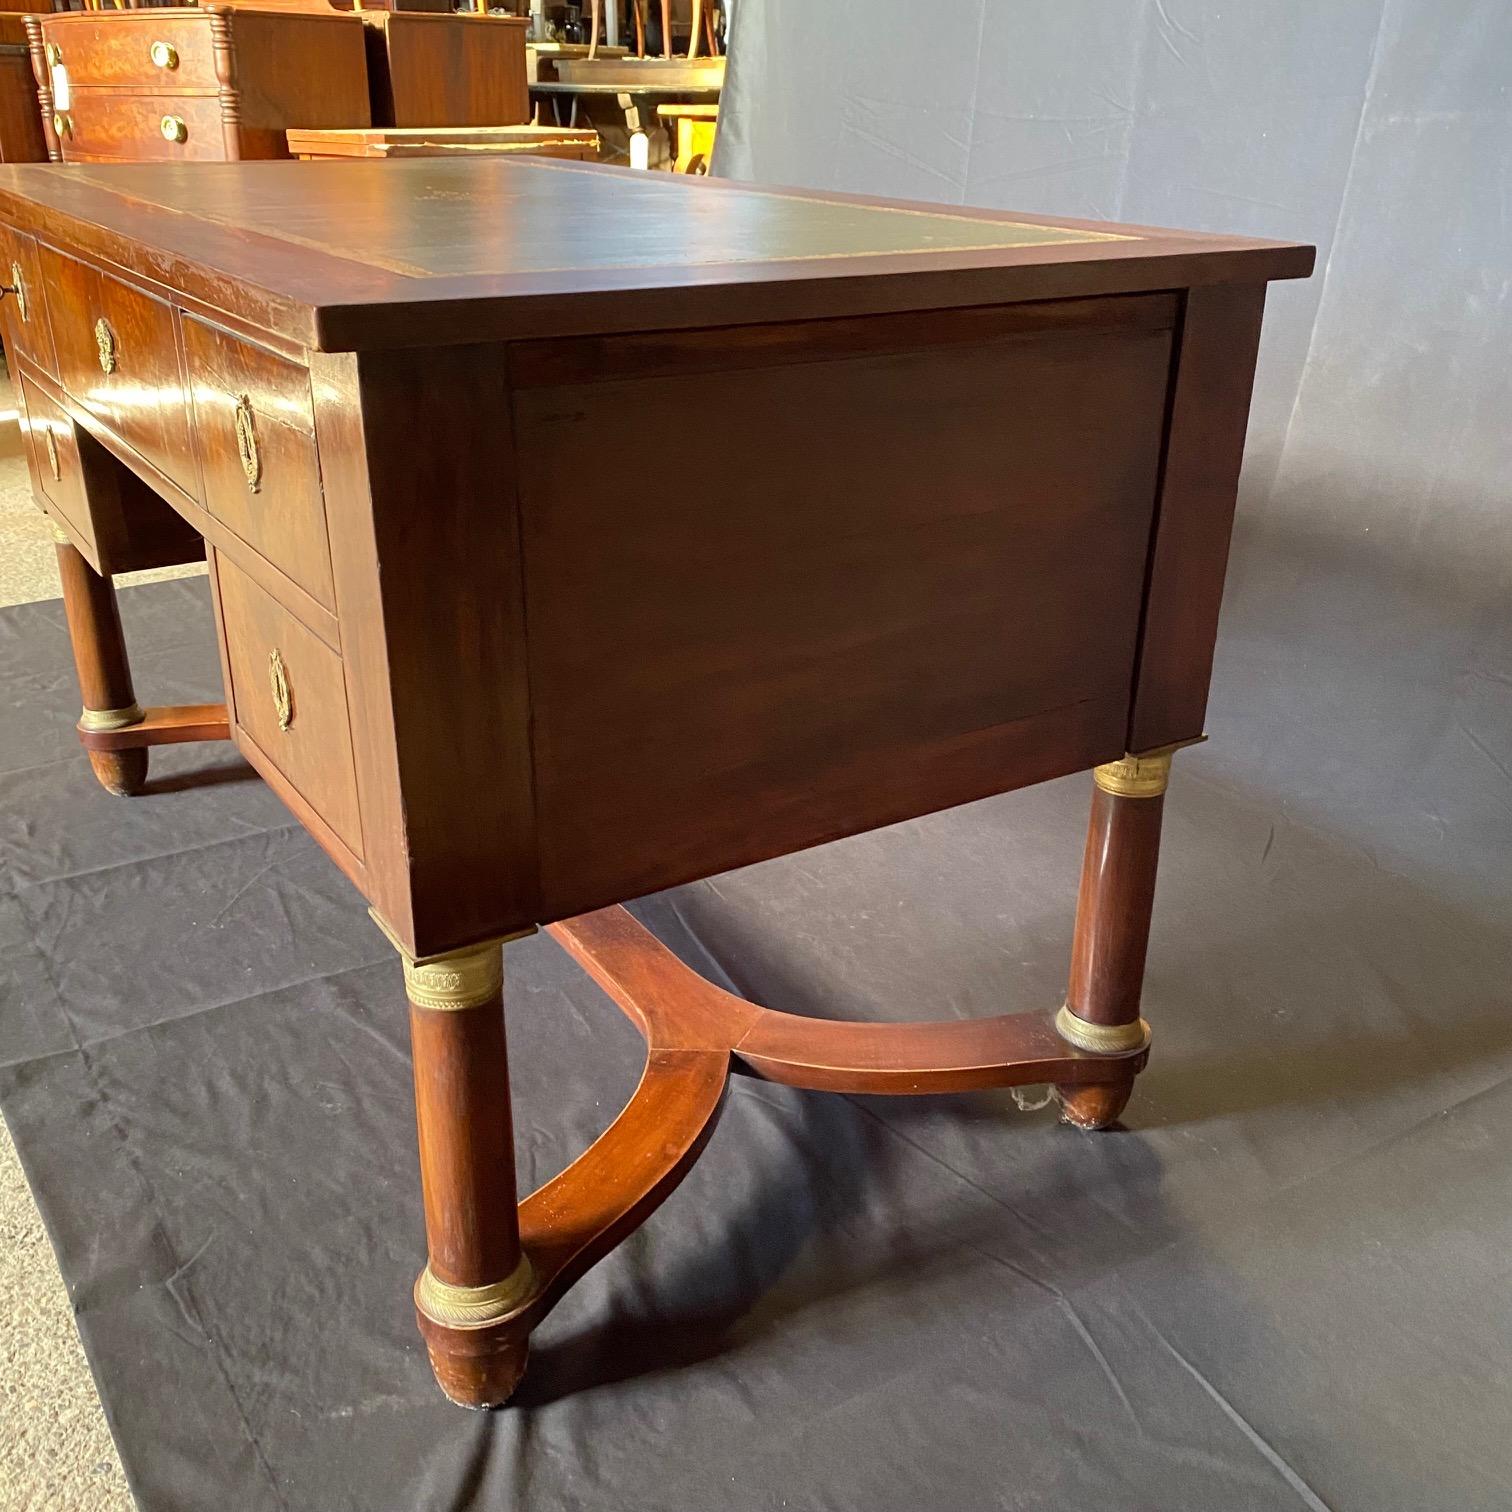 Elegant dual-sided 1880s French Empire style pedestal leg desk featuring the original rectangular gold embossed green leather top in good condition. Top sits on turned trestle legs with gilt bronze accents and stretcher. The single center drawer has